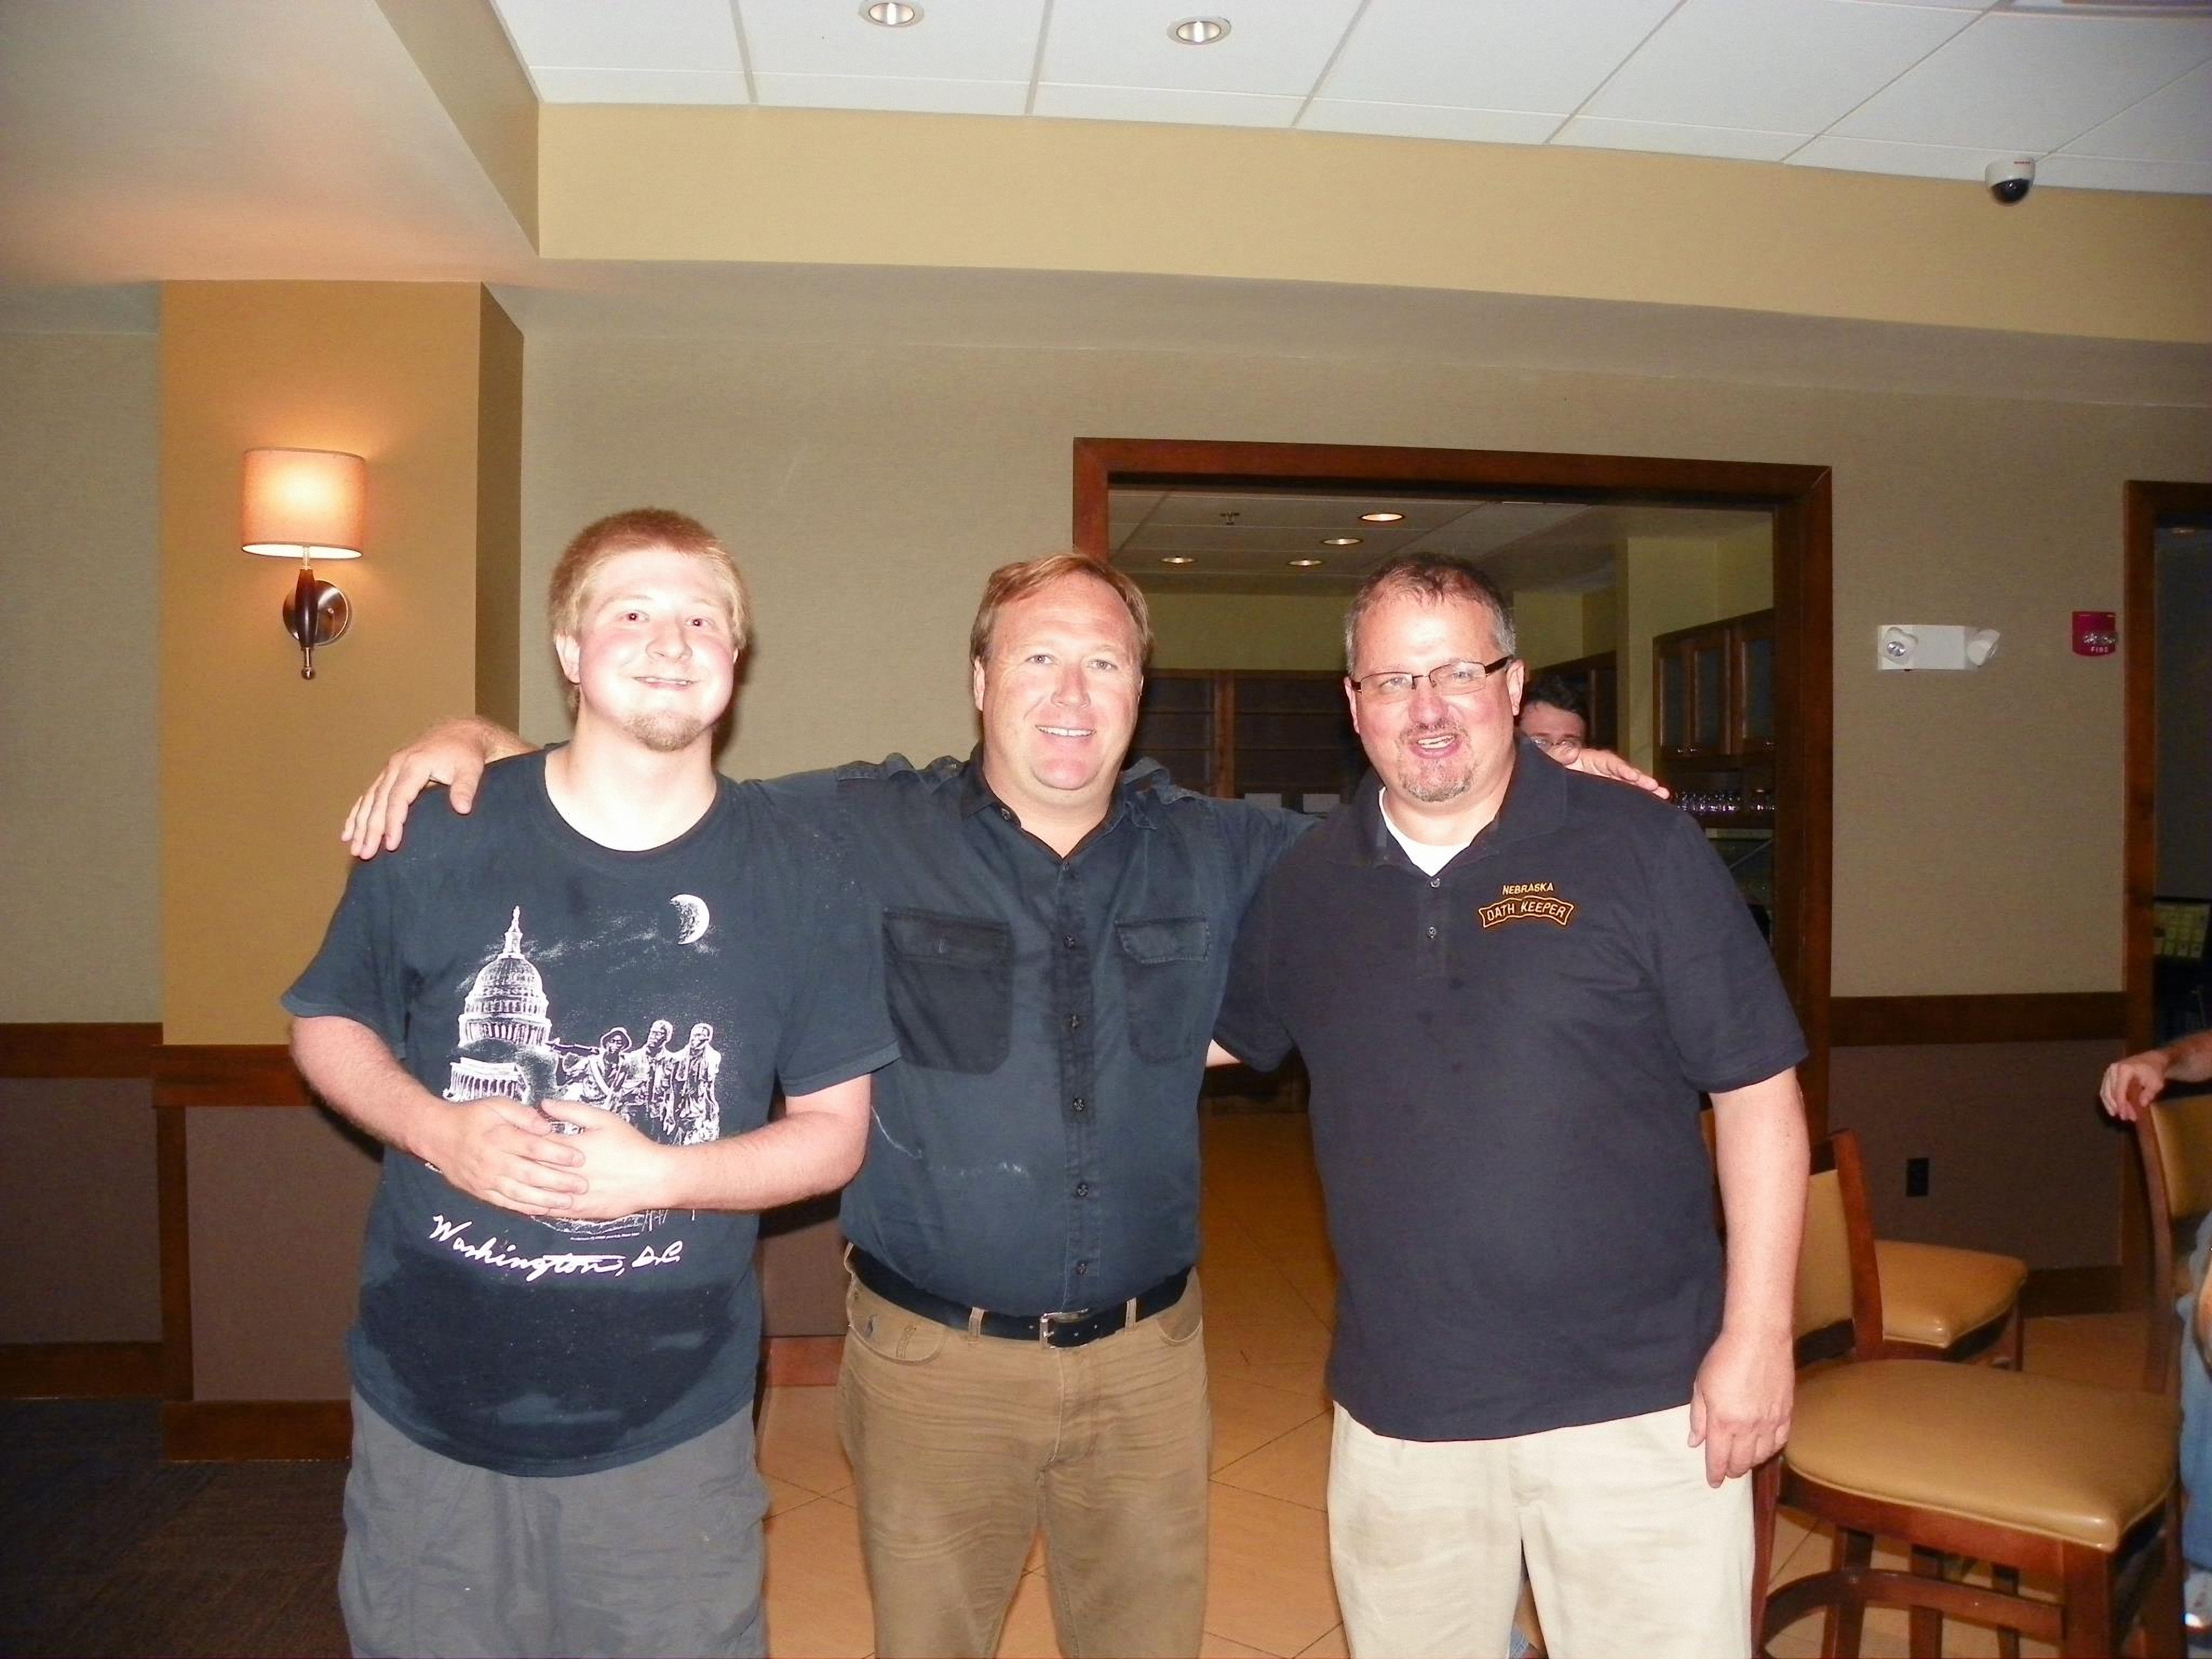 10-USWGO-Founder-Brian-D.-Hill-with-Infowars-founder-Alex-Jones-and-Oath-Keepers-founder-Stewart-Rhodes.jpg